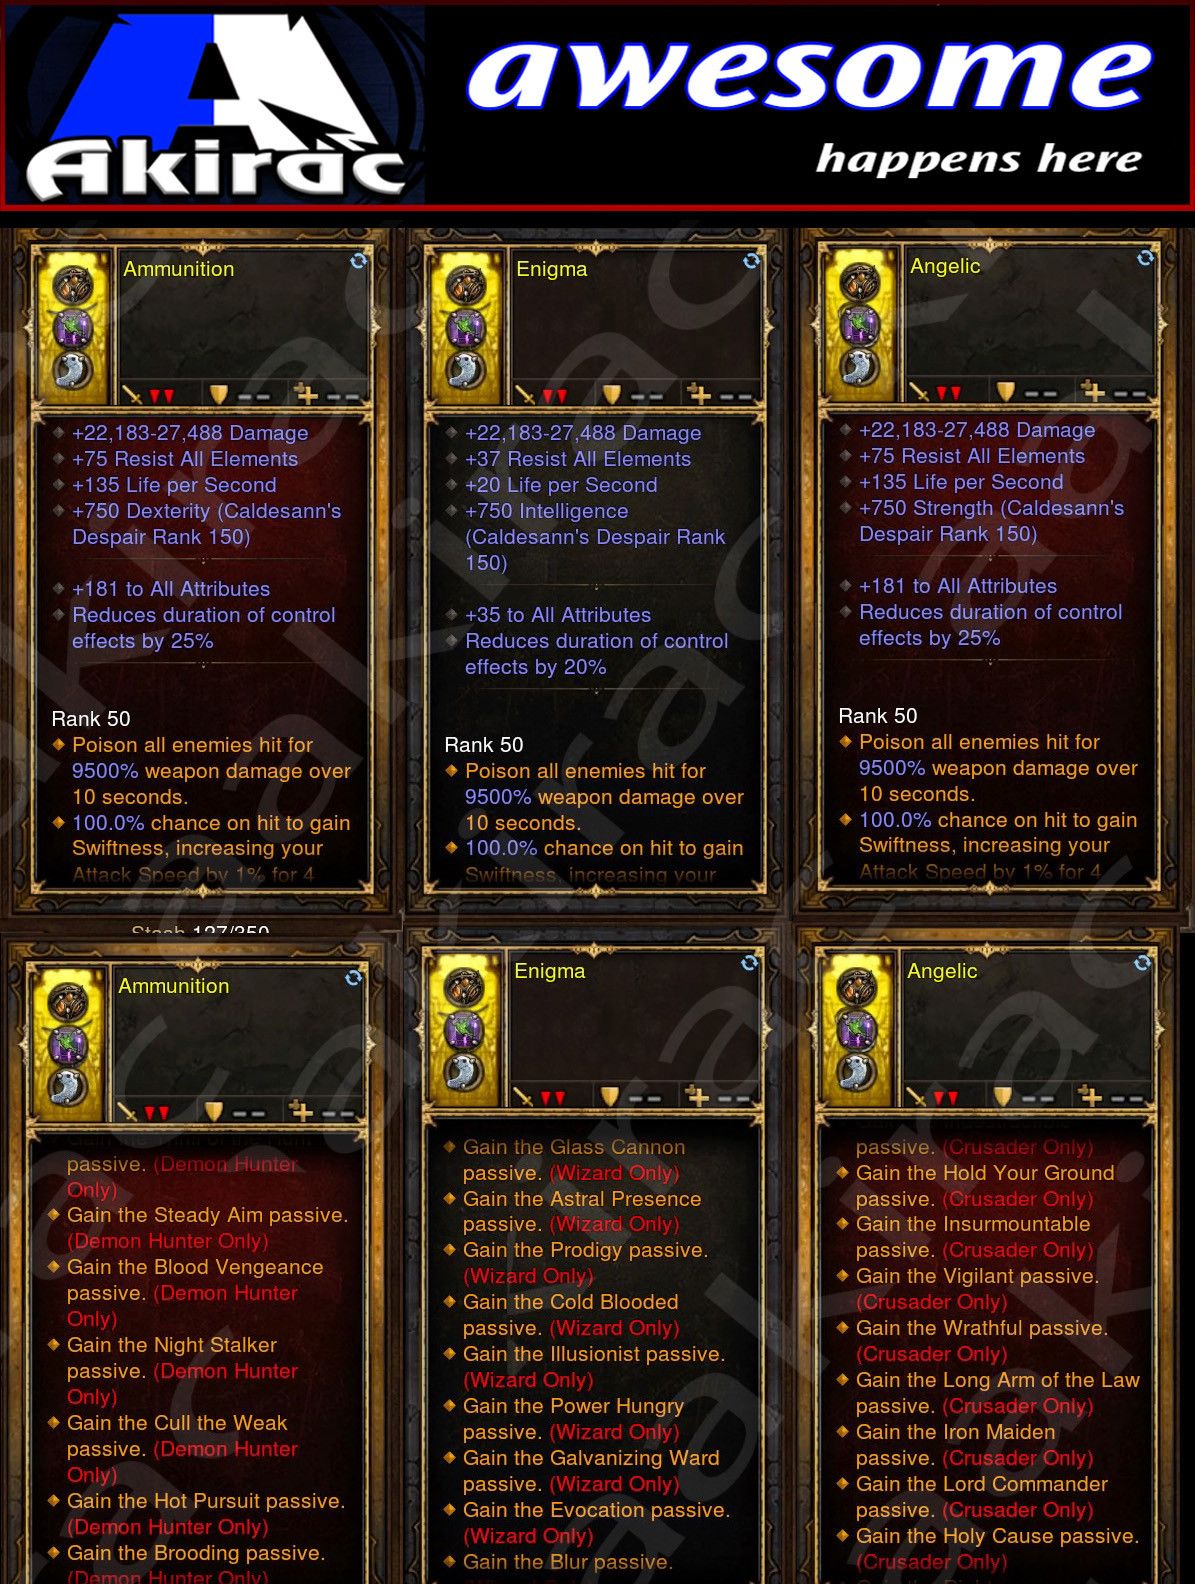 14x Passive Amulets Modded Diablo 3 Mods ROS Seasonal and Non Seasonal Save Mod - Modded Items and Gear - Hacks - Cheats - Trainers for Playstation 4 - Playstation 5 - Nintendo Switch - Xbox One